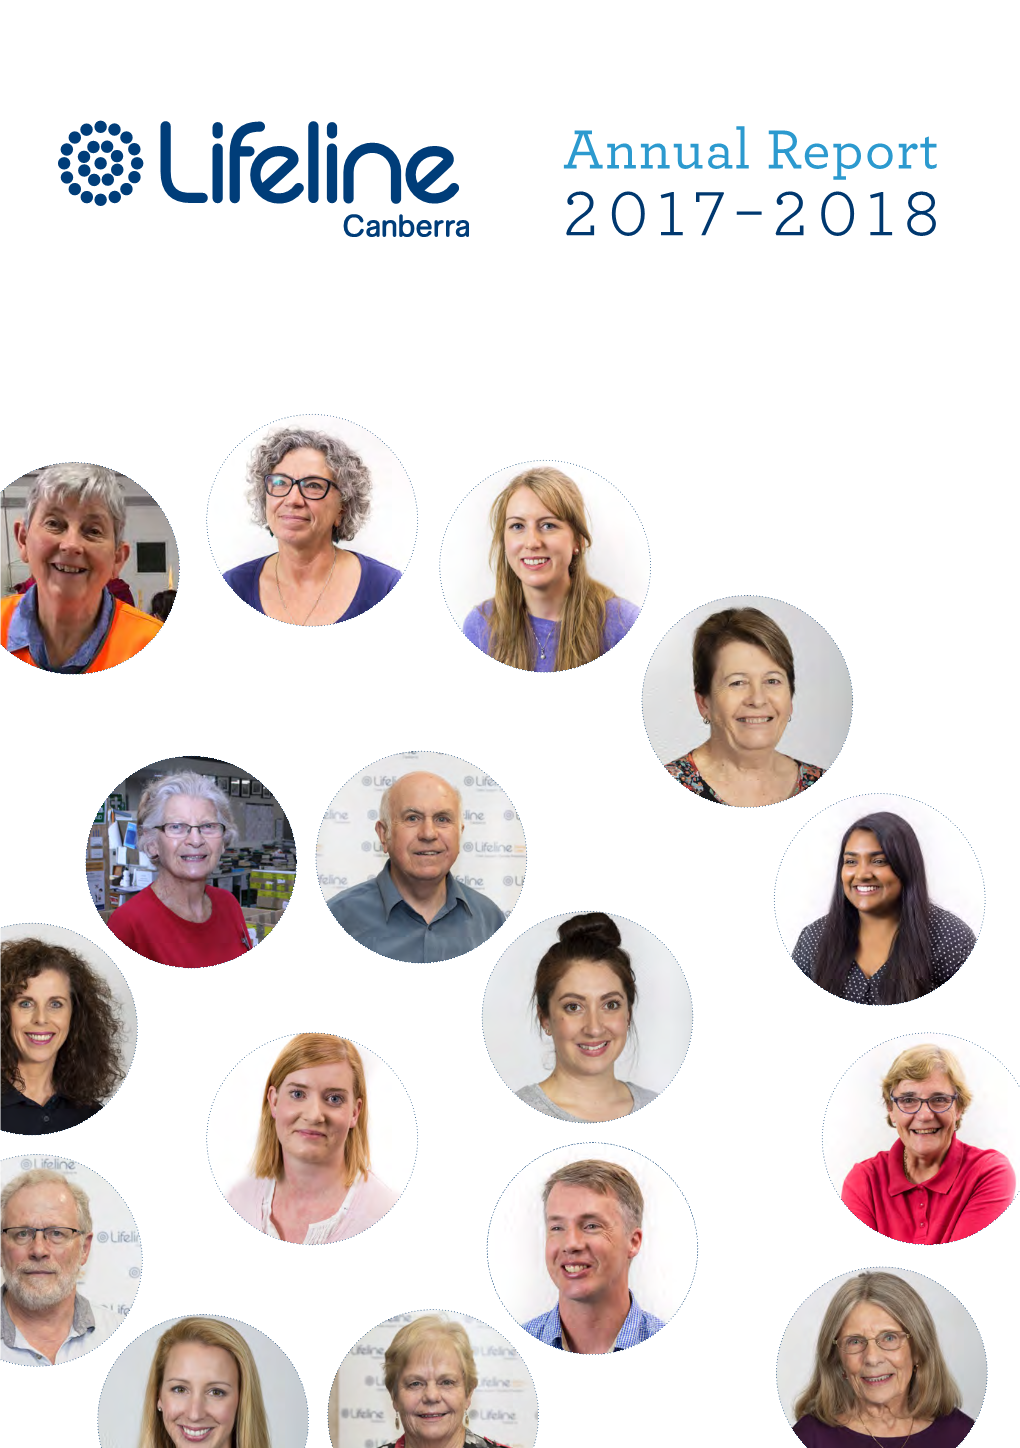 Lifeline Canberra Annual Report 2017-2018